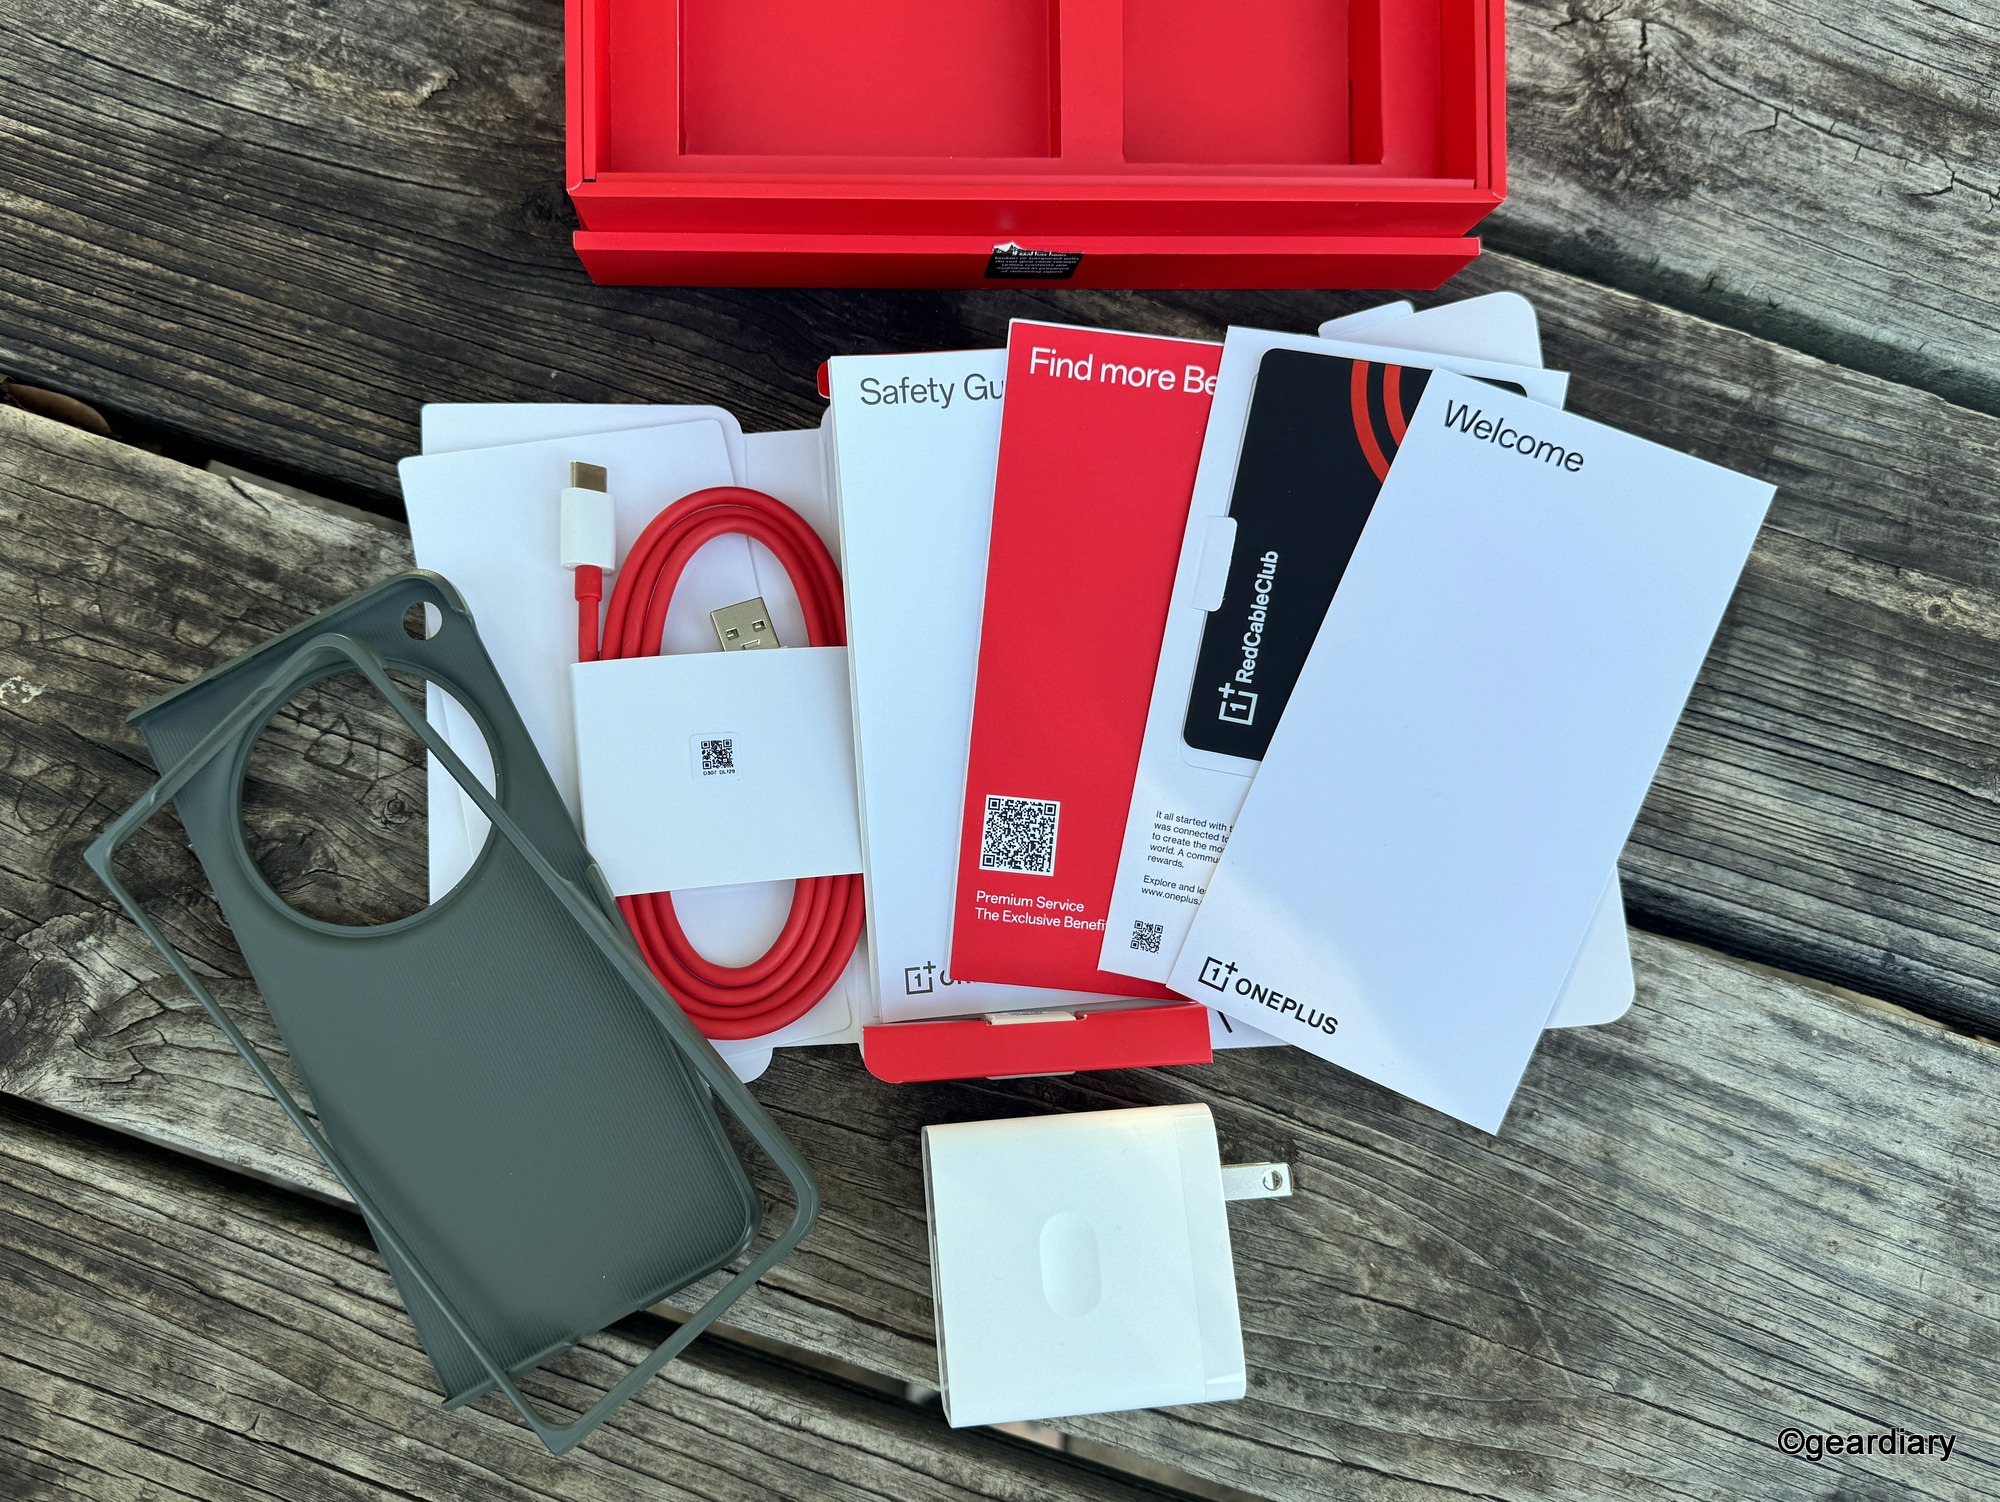 All the other things included with the OnePlus Open.